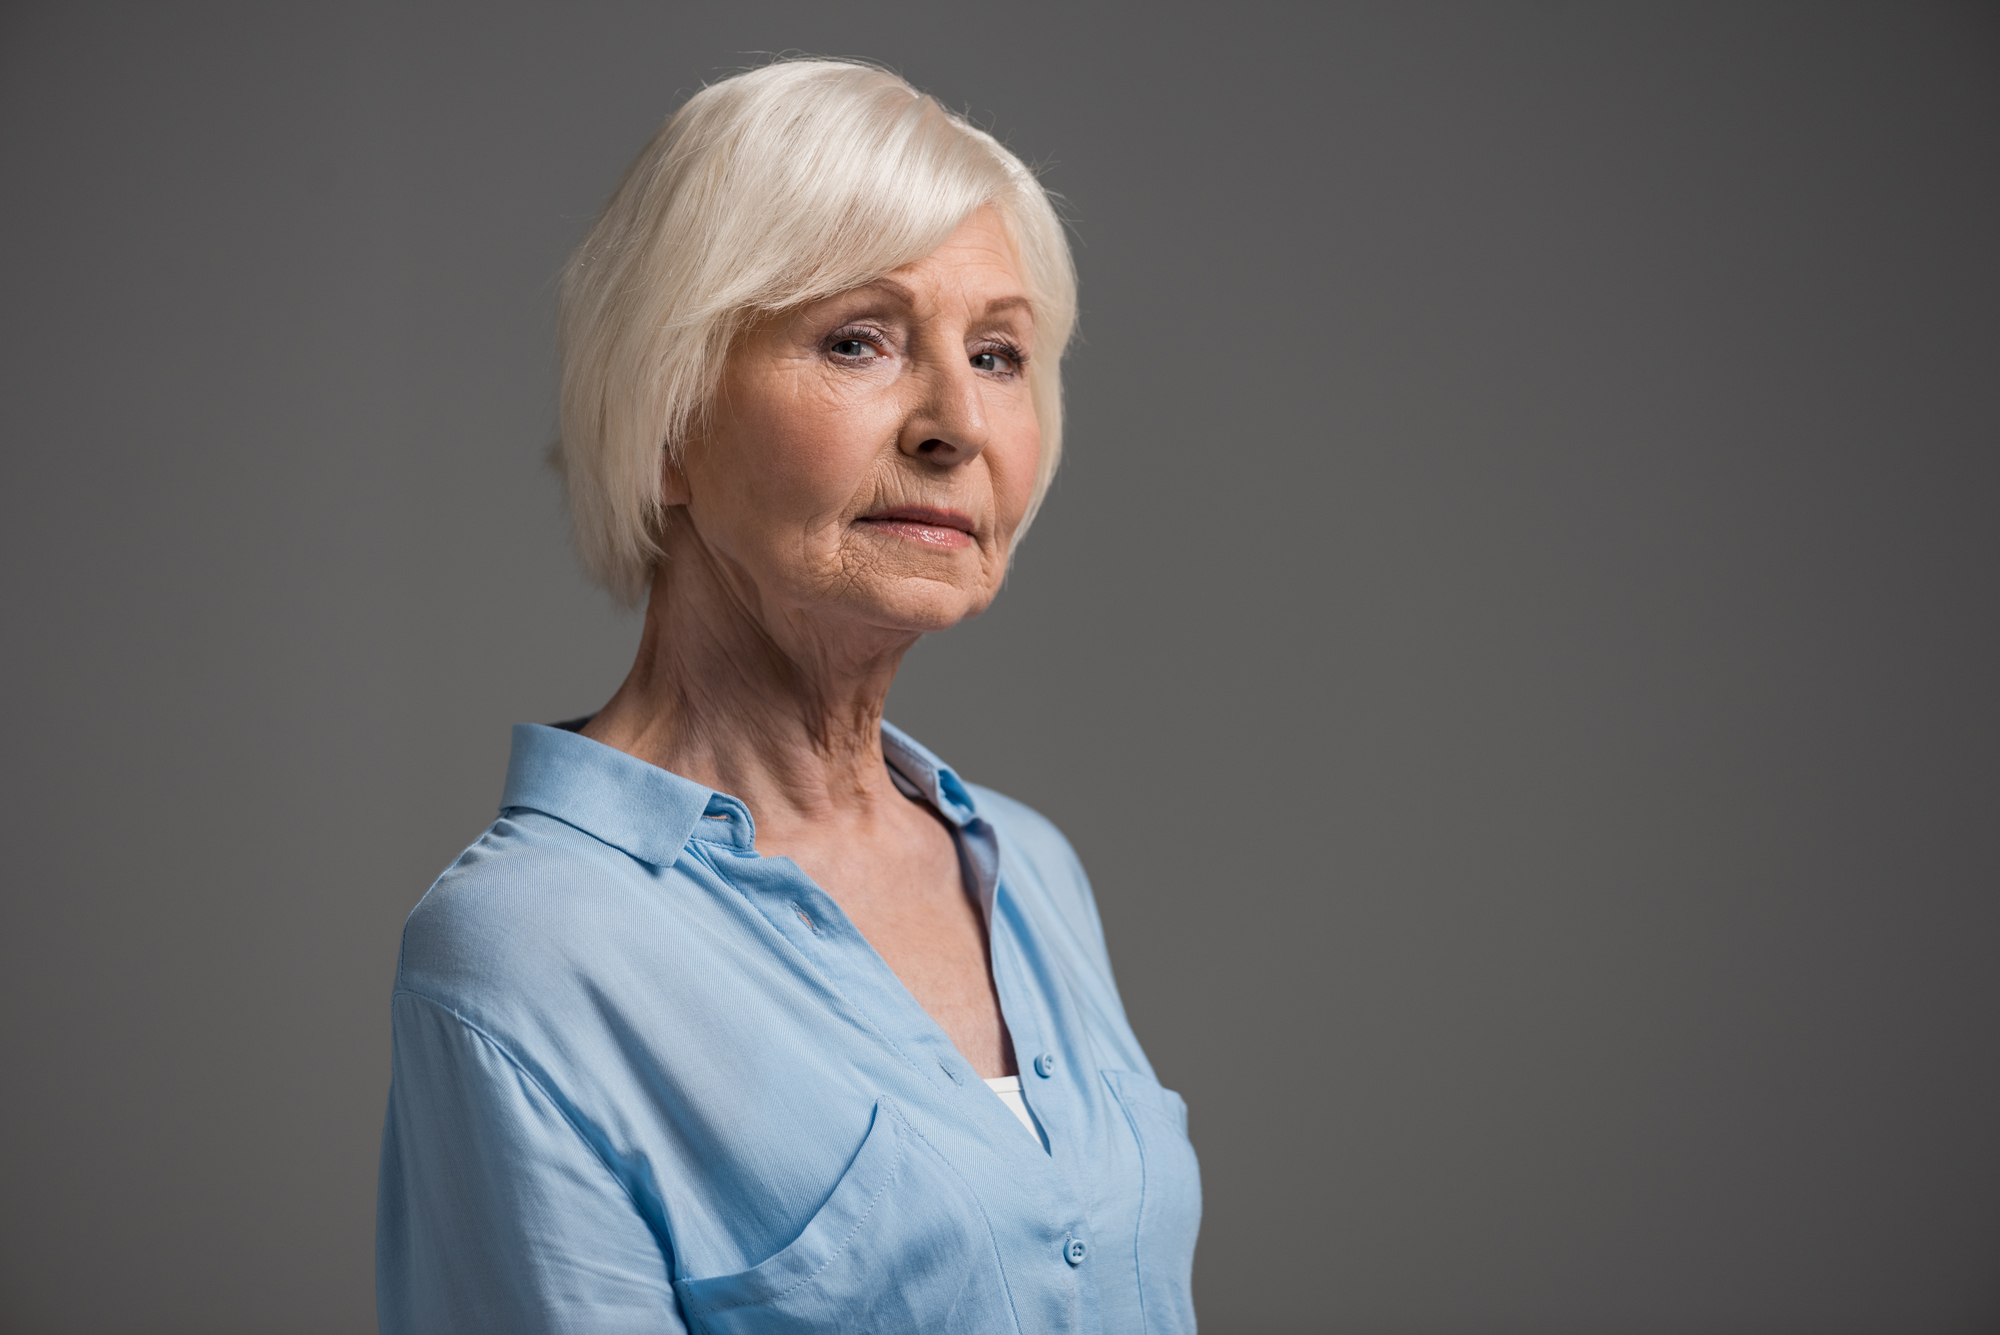 884 Older Woman Slim Stock Photos, Images & Pictures